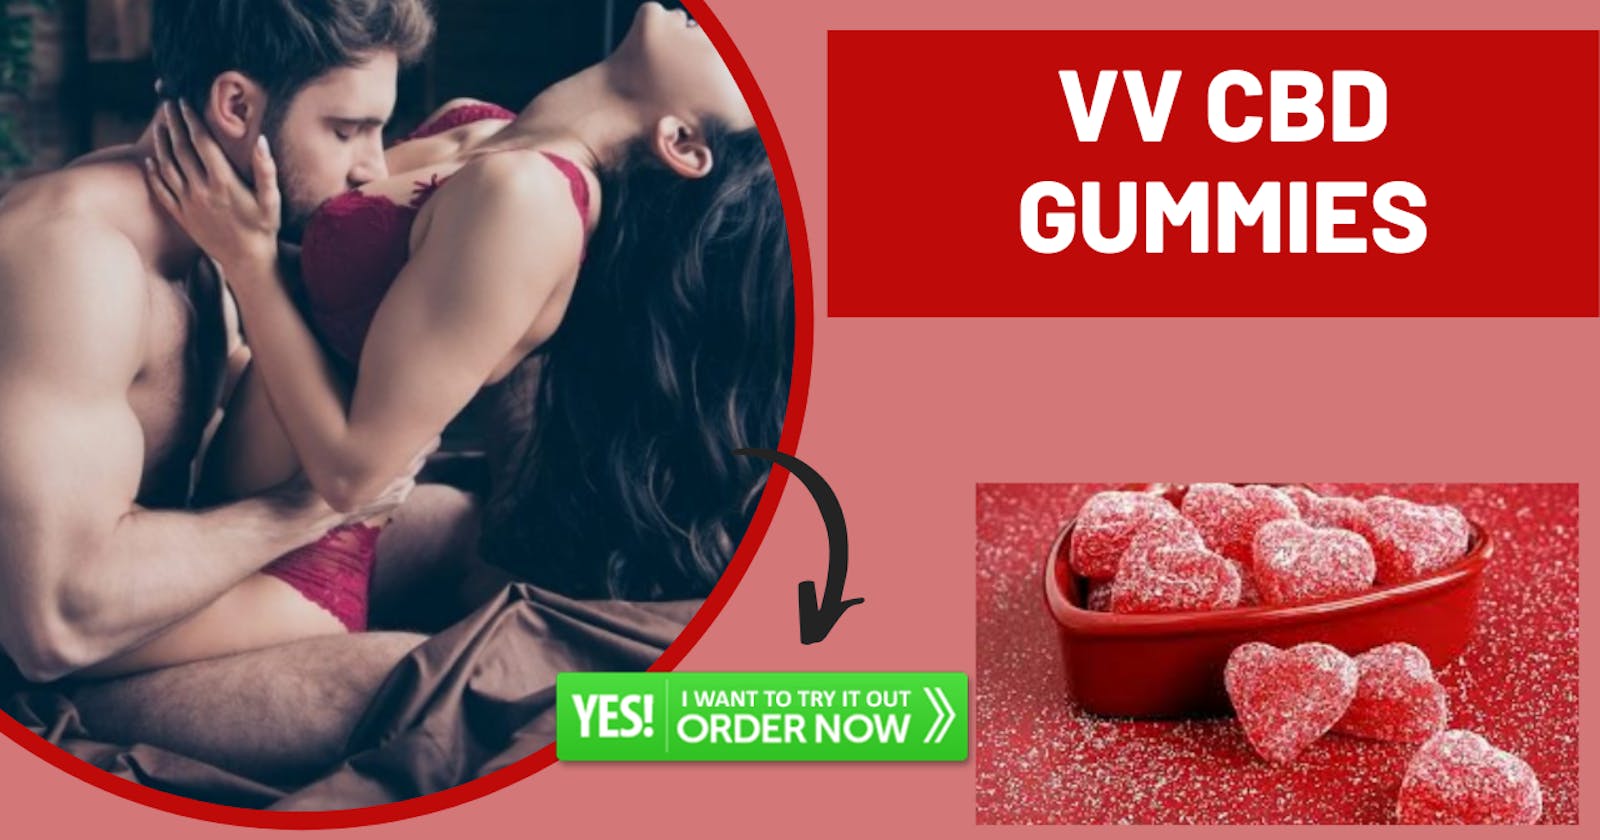 VV CBD Gummies - 【New Update]】Does It Really Work?